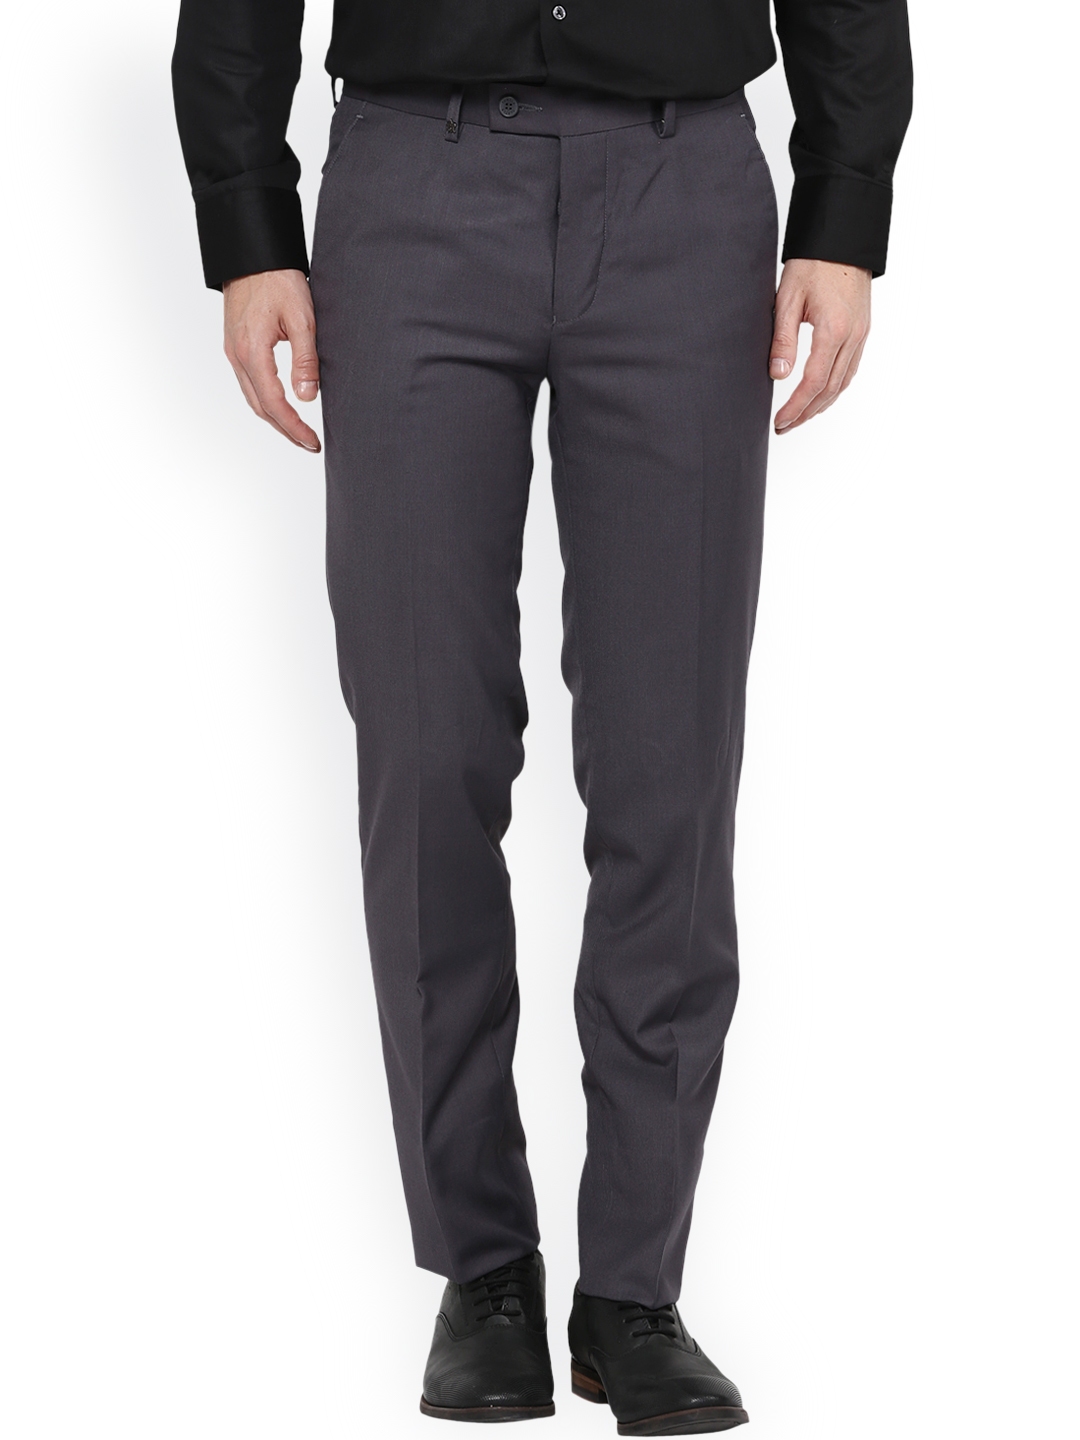 Buy Turtle Grey Slim Fit Formal Trousers - Trousers for Men 951831 | Myntra